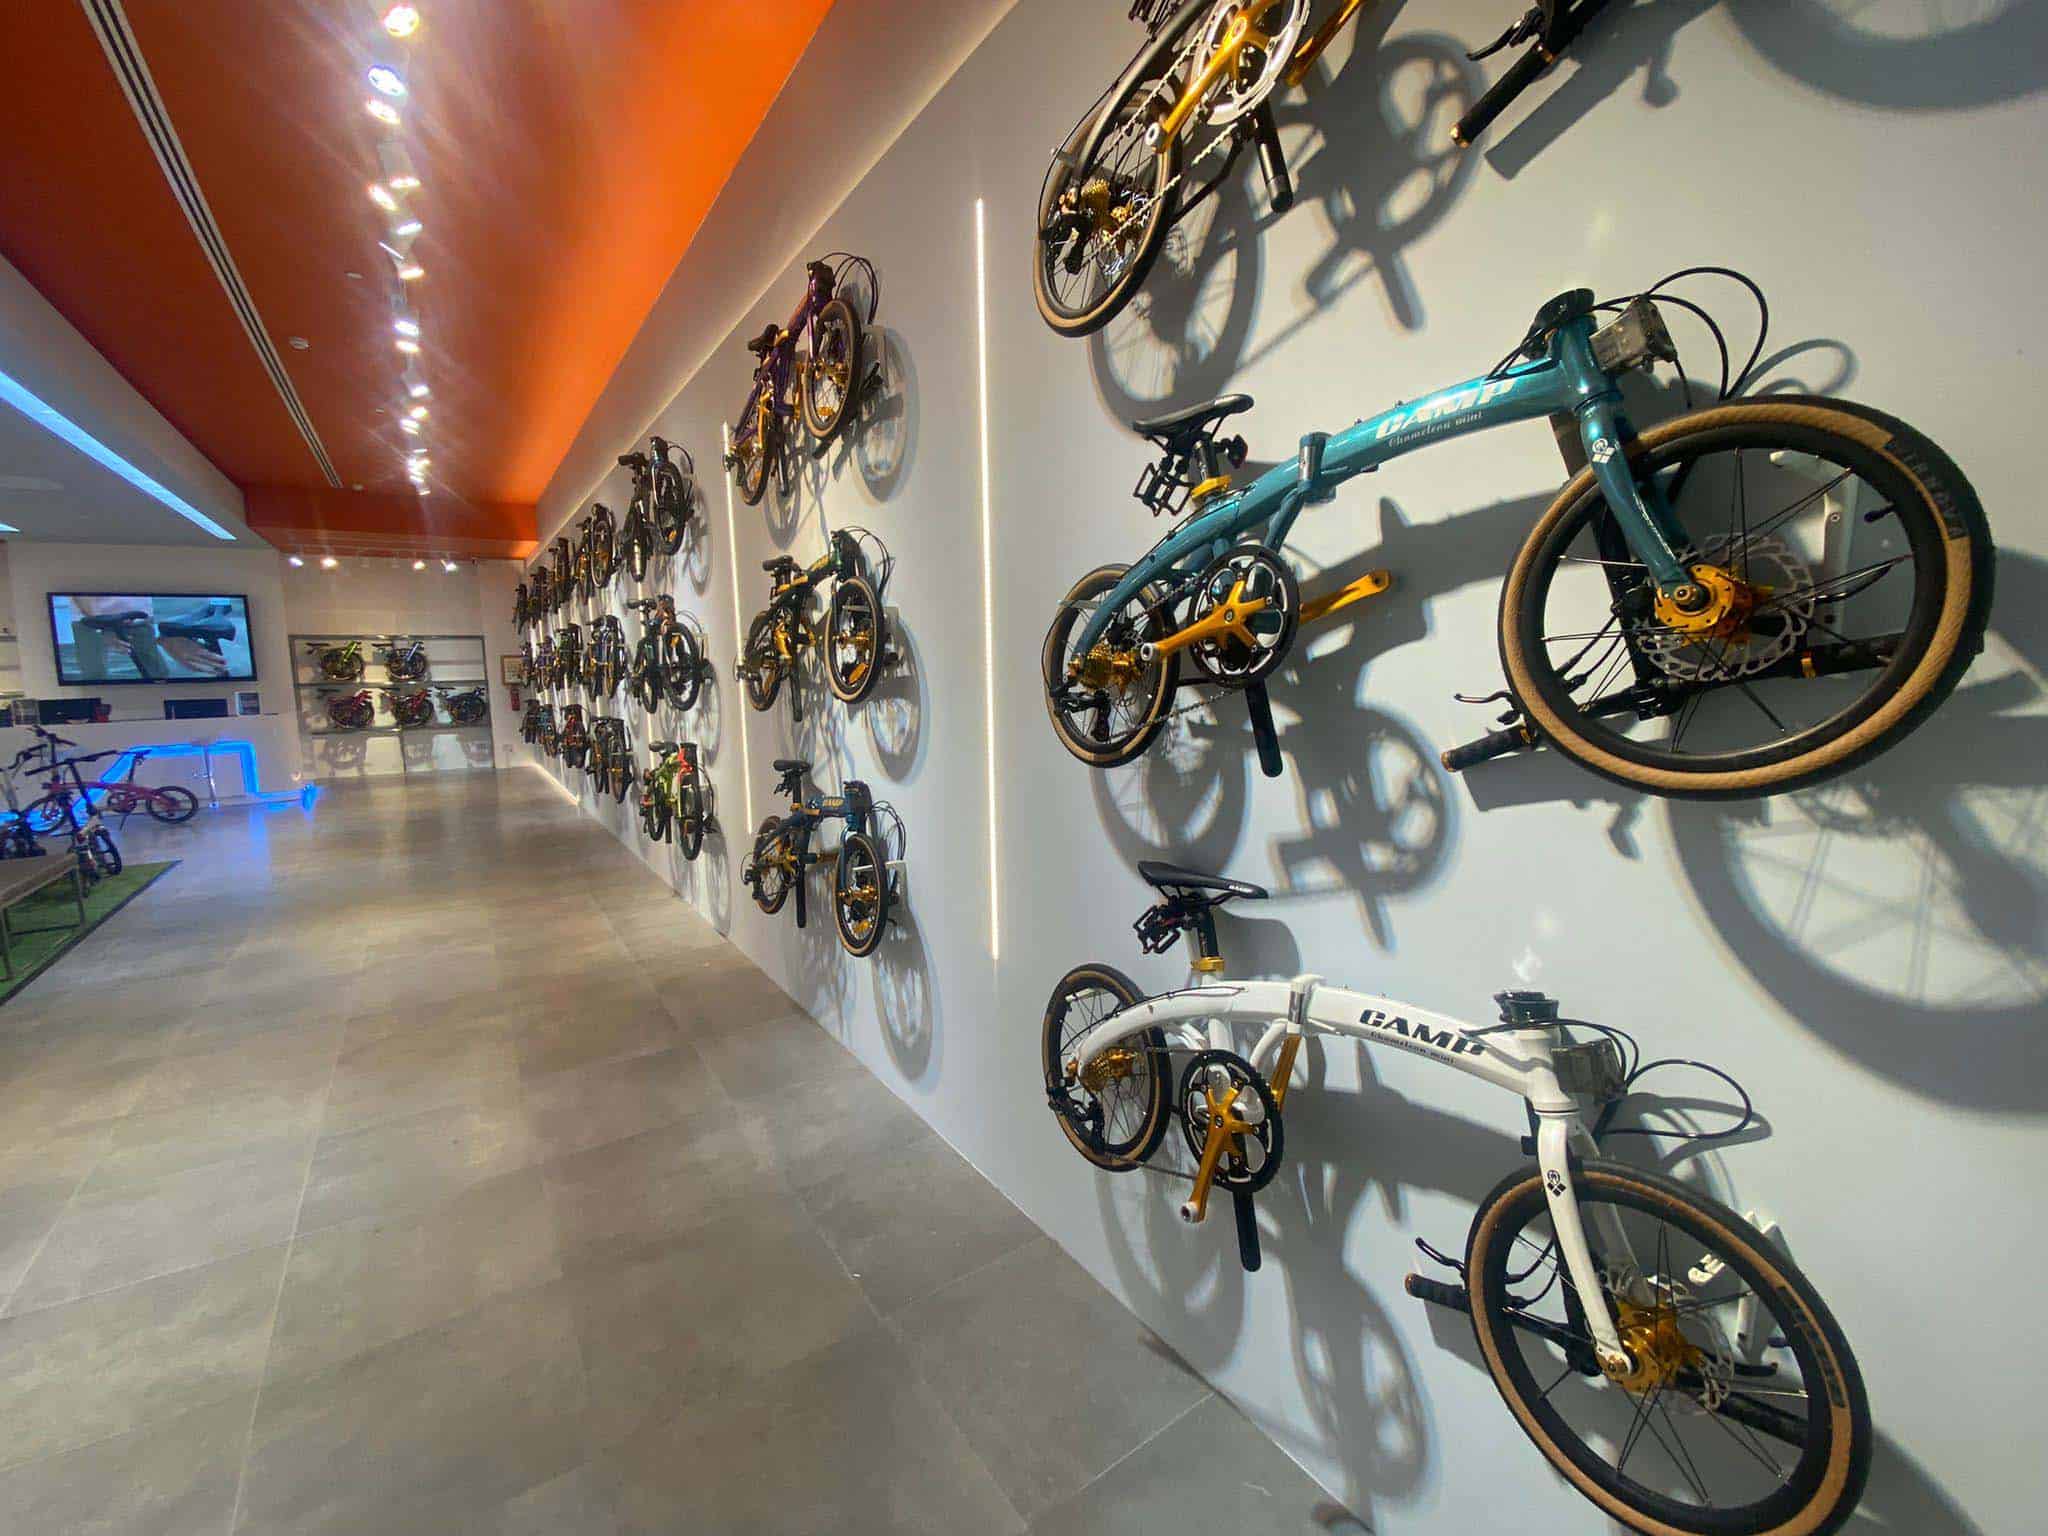 MOBOT x ROYALE opens 7th bicycle shop in Westgate Jurong 2 2048x1536 1 - Press release: MOBOT x ROYALE Opens 7th Bicycle Shop In Westgate Jurong